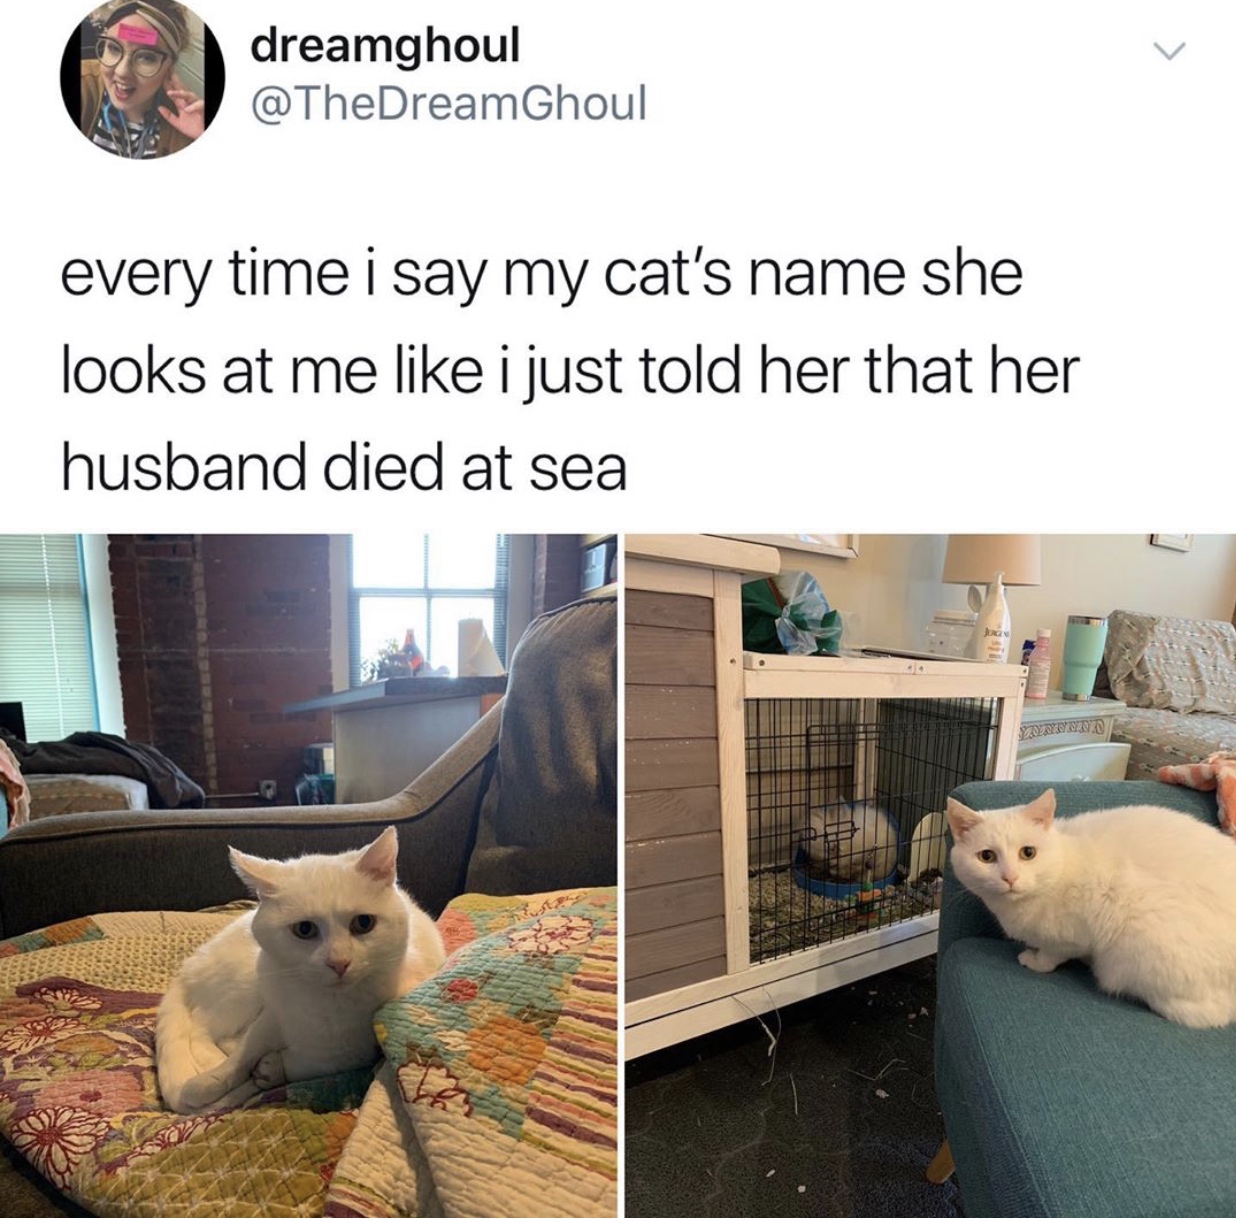 cat husband died at sea - dreamghoul every time i say my cat's name she looks at me i just told her that her husband died at sea